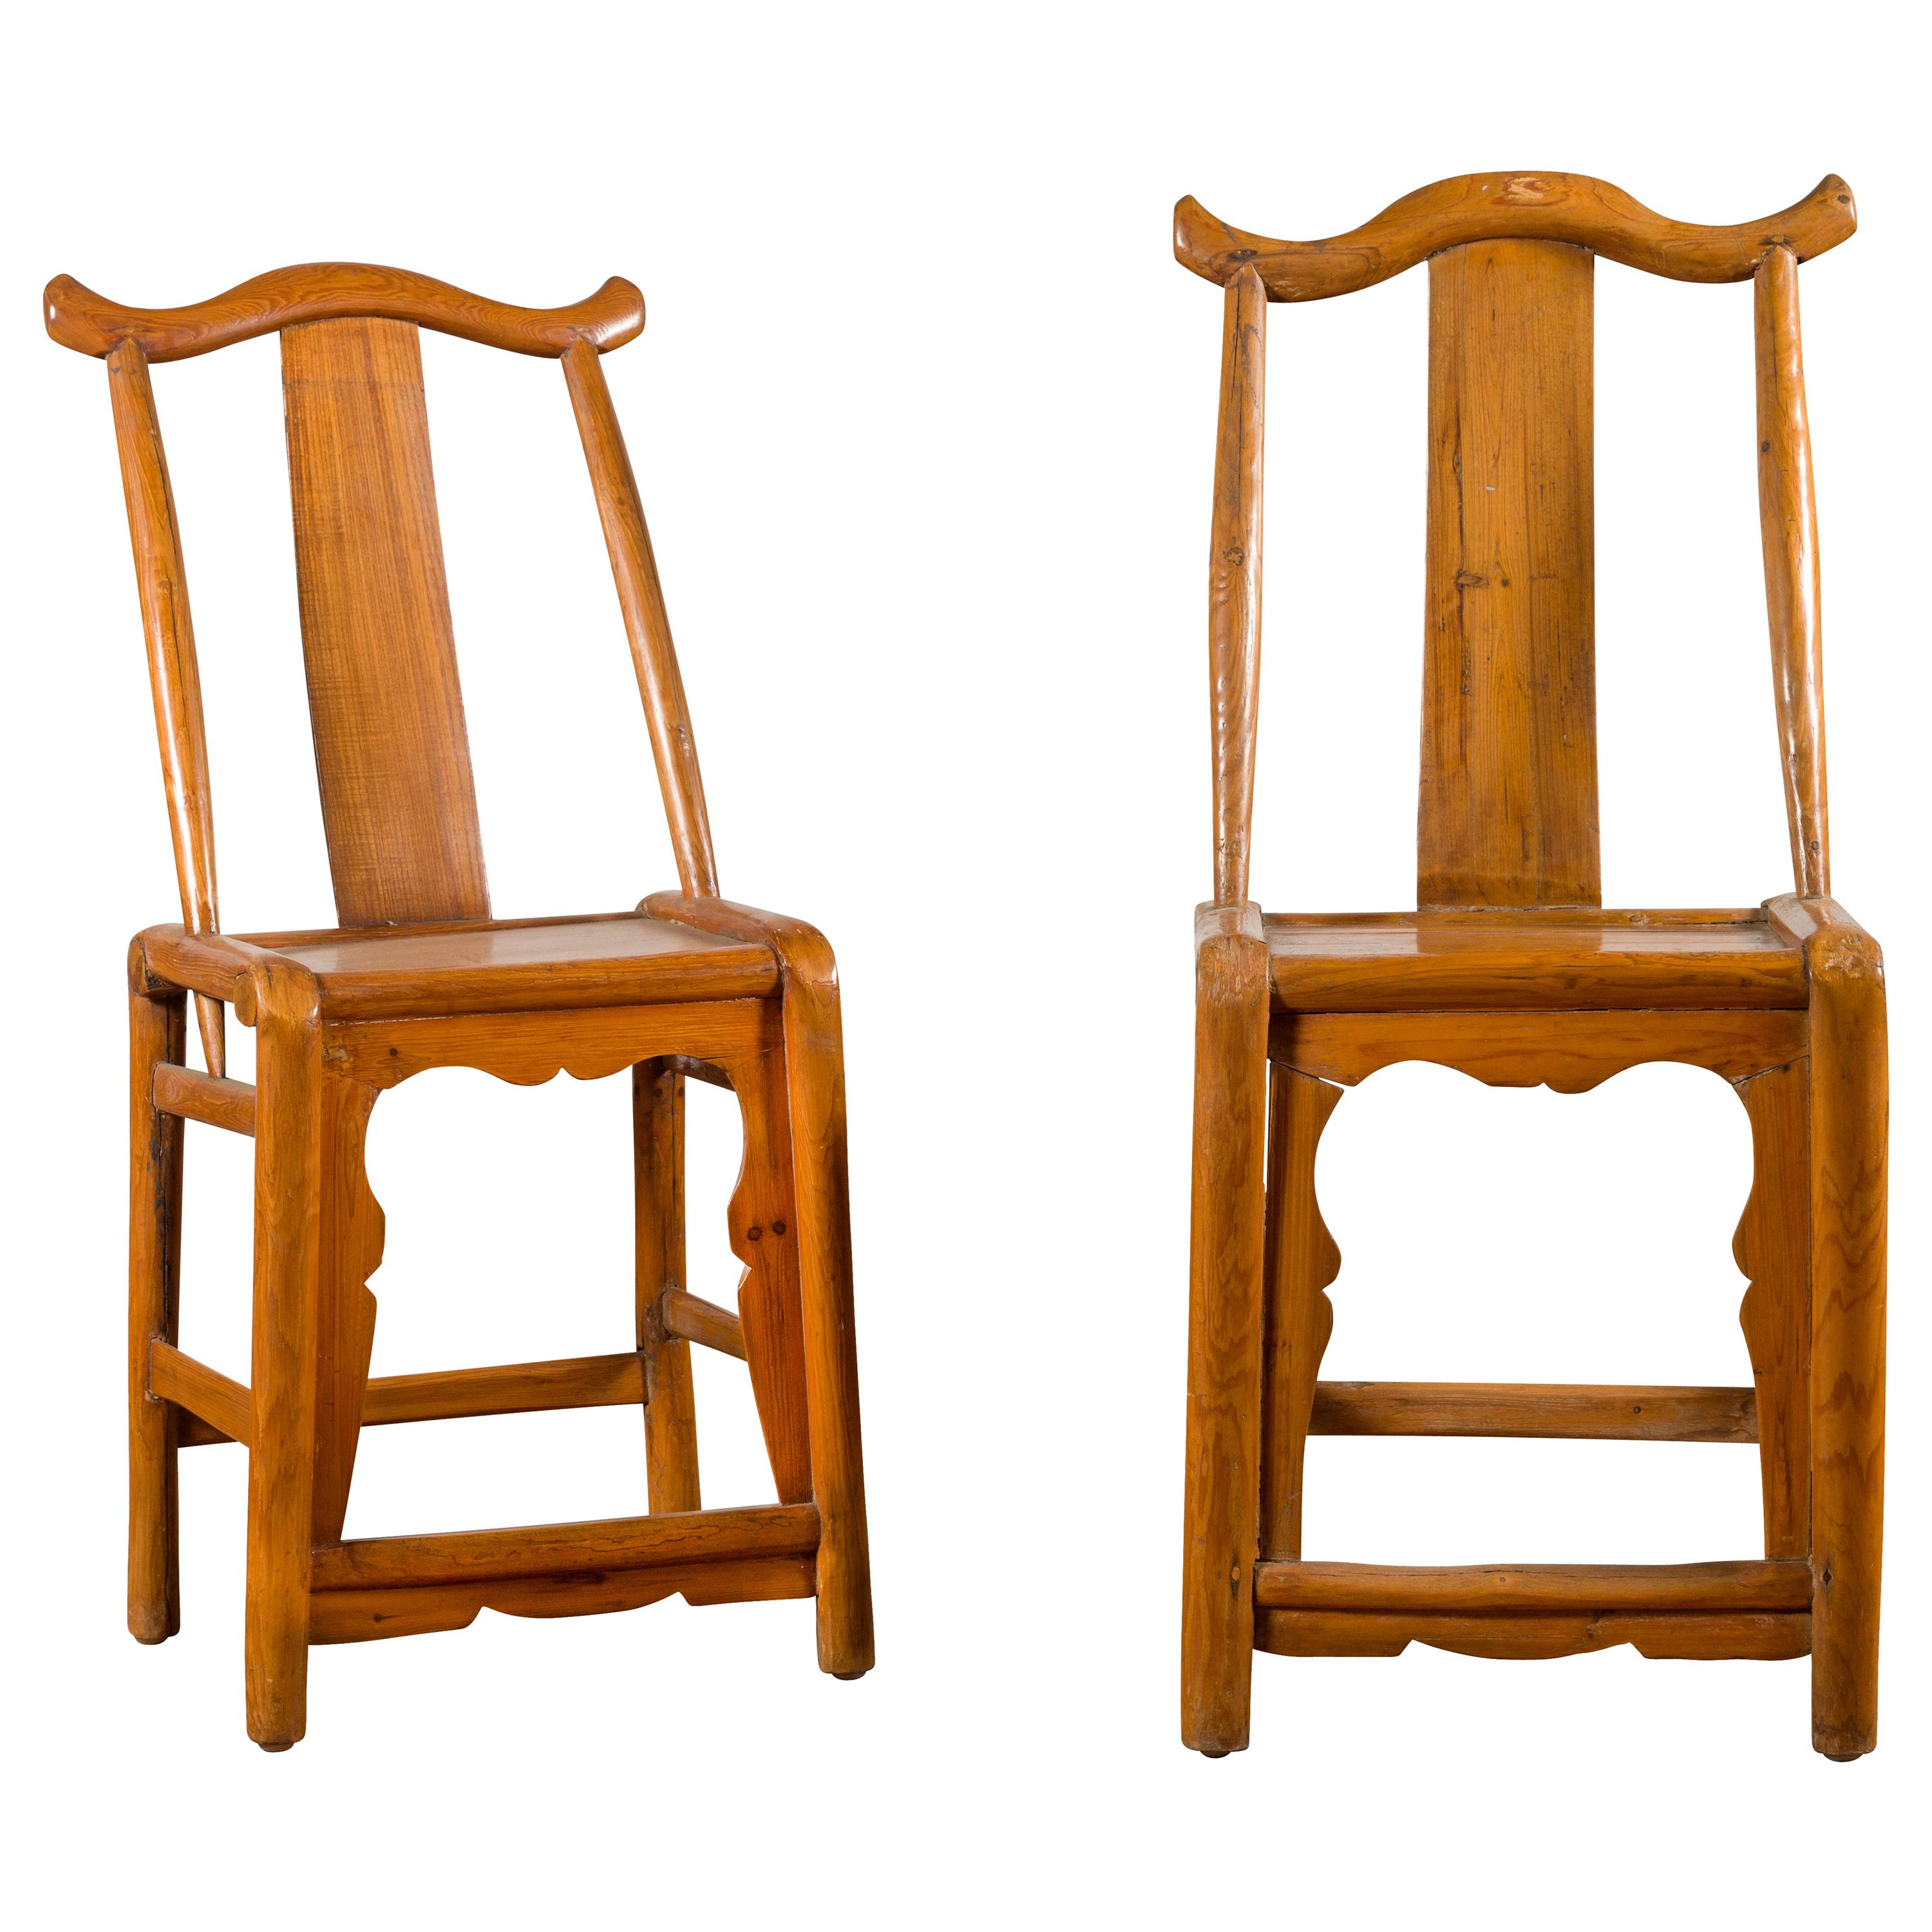 Near Pair of Chinese Qing Dynasty 19th Century Yoke High Back Decorative Chairs